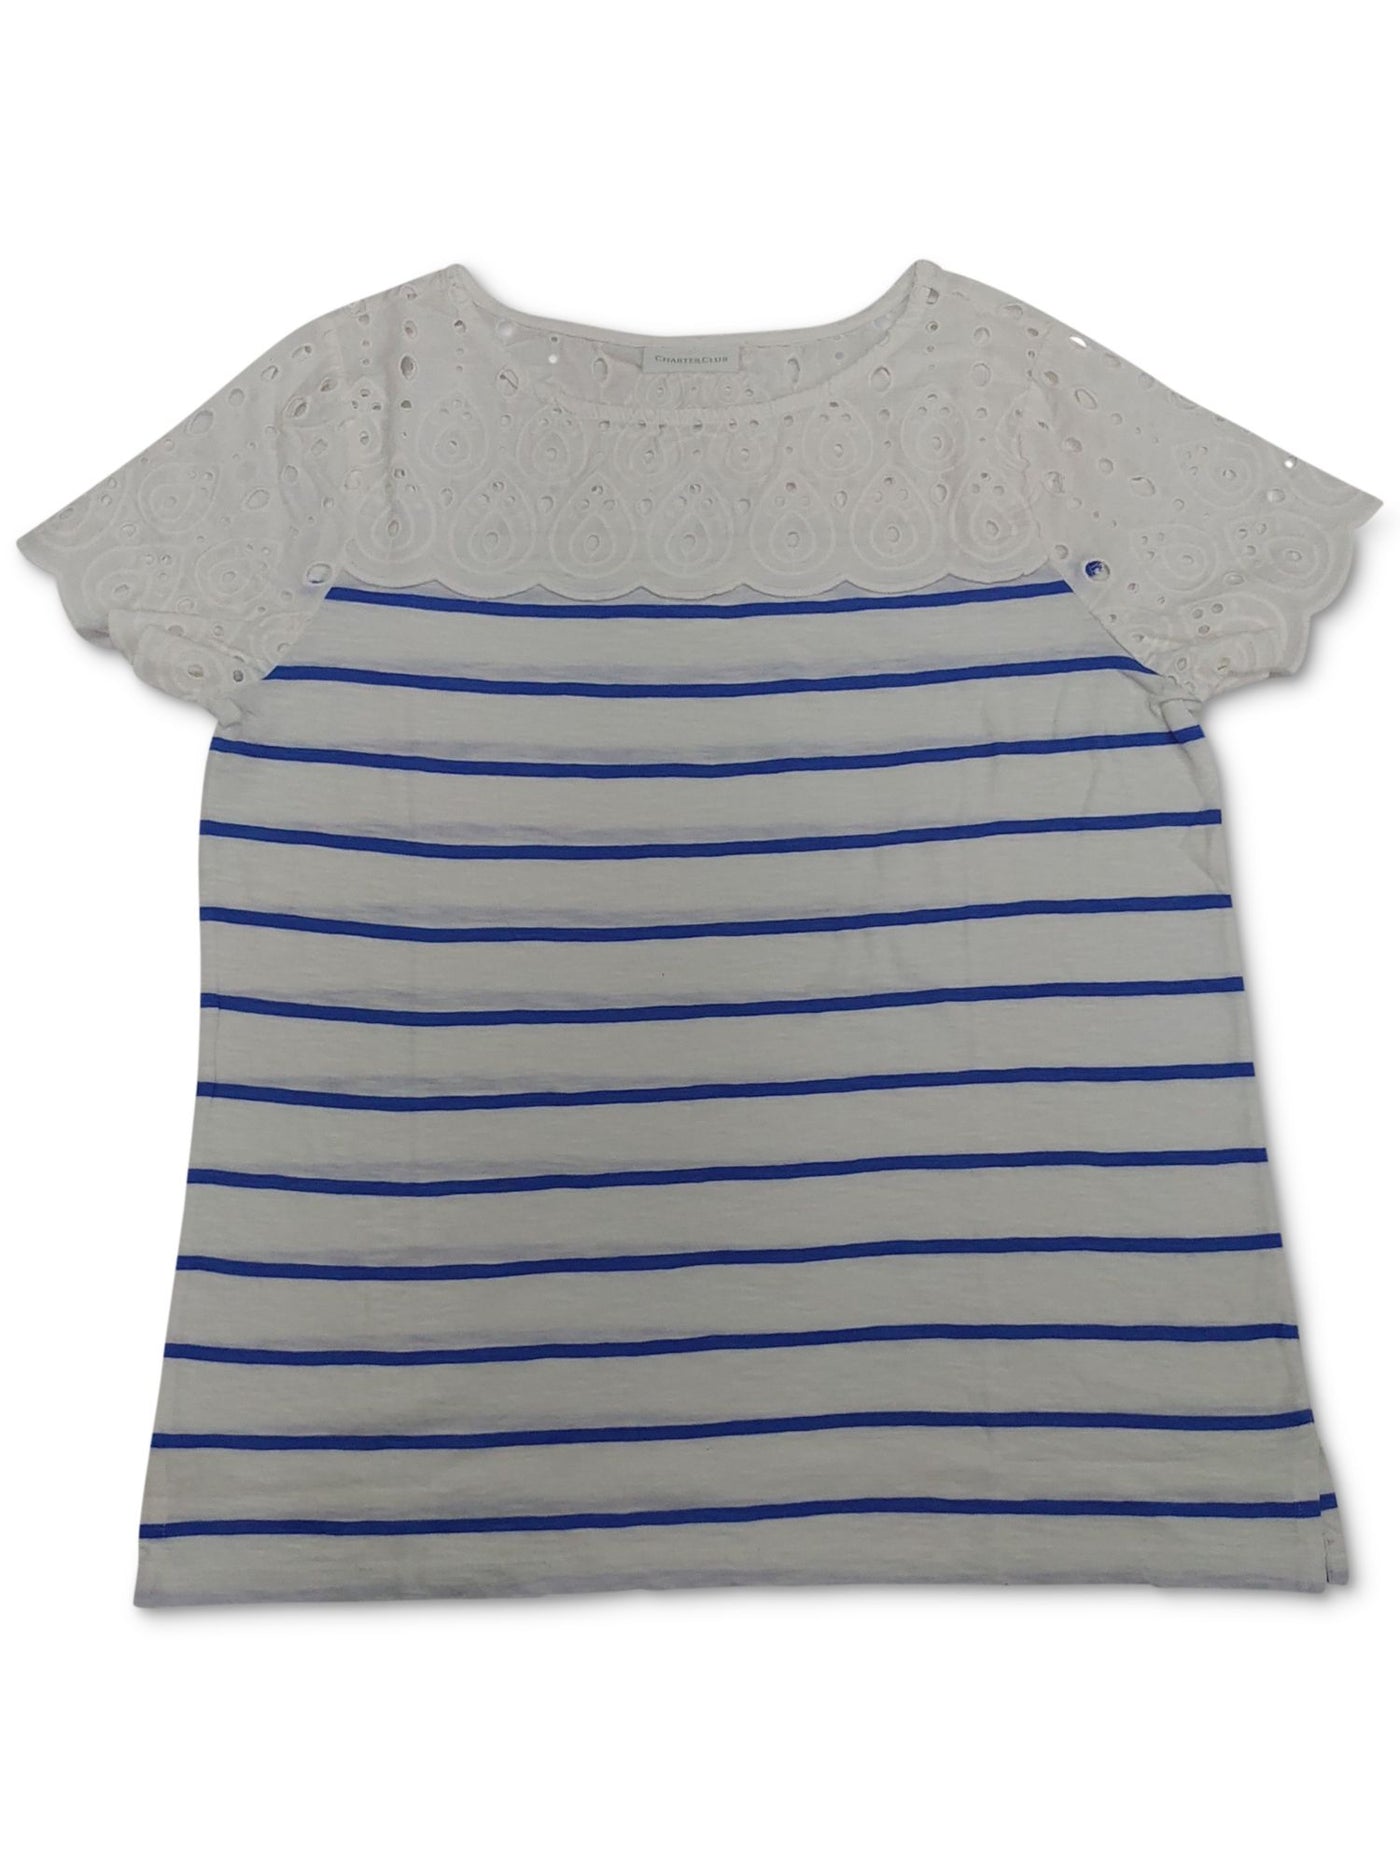 CHARTER CLUB Womens White Striped Short Sleeve Boat Neck T-Shirt Size: S